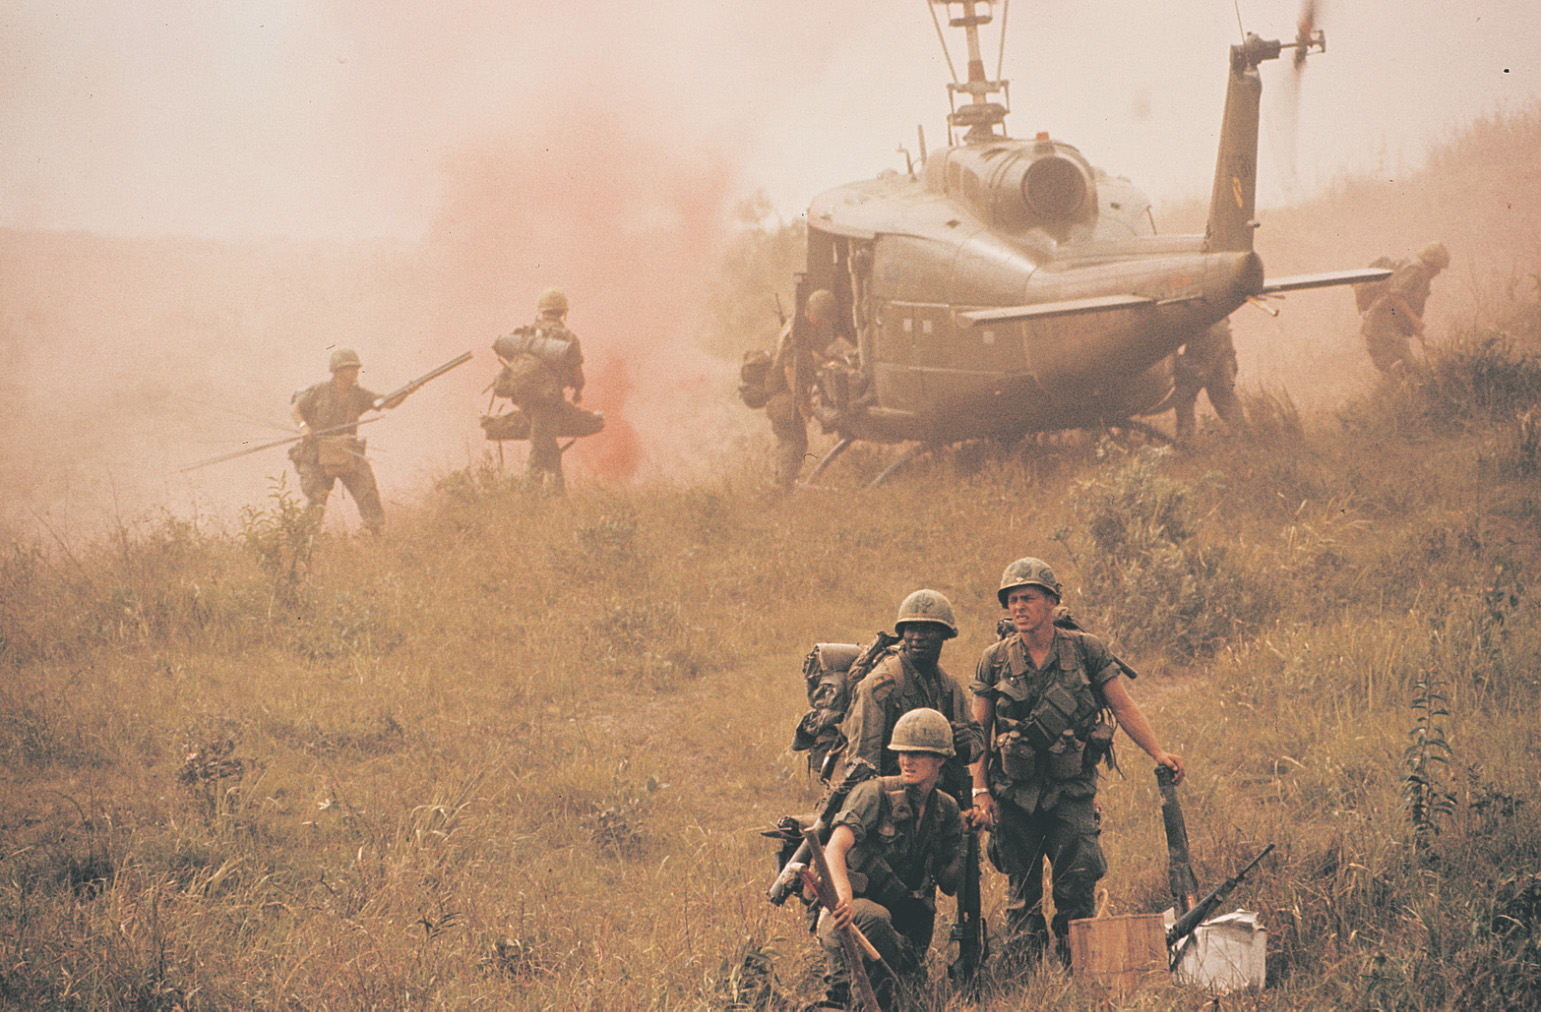 Photo: soldiers and helicopter in dusty field